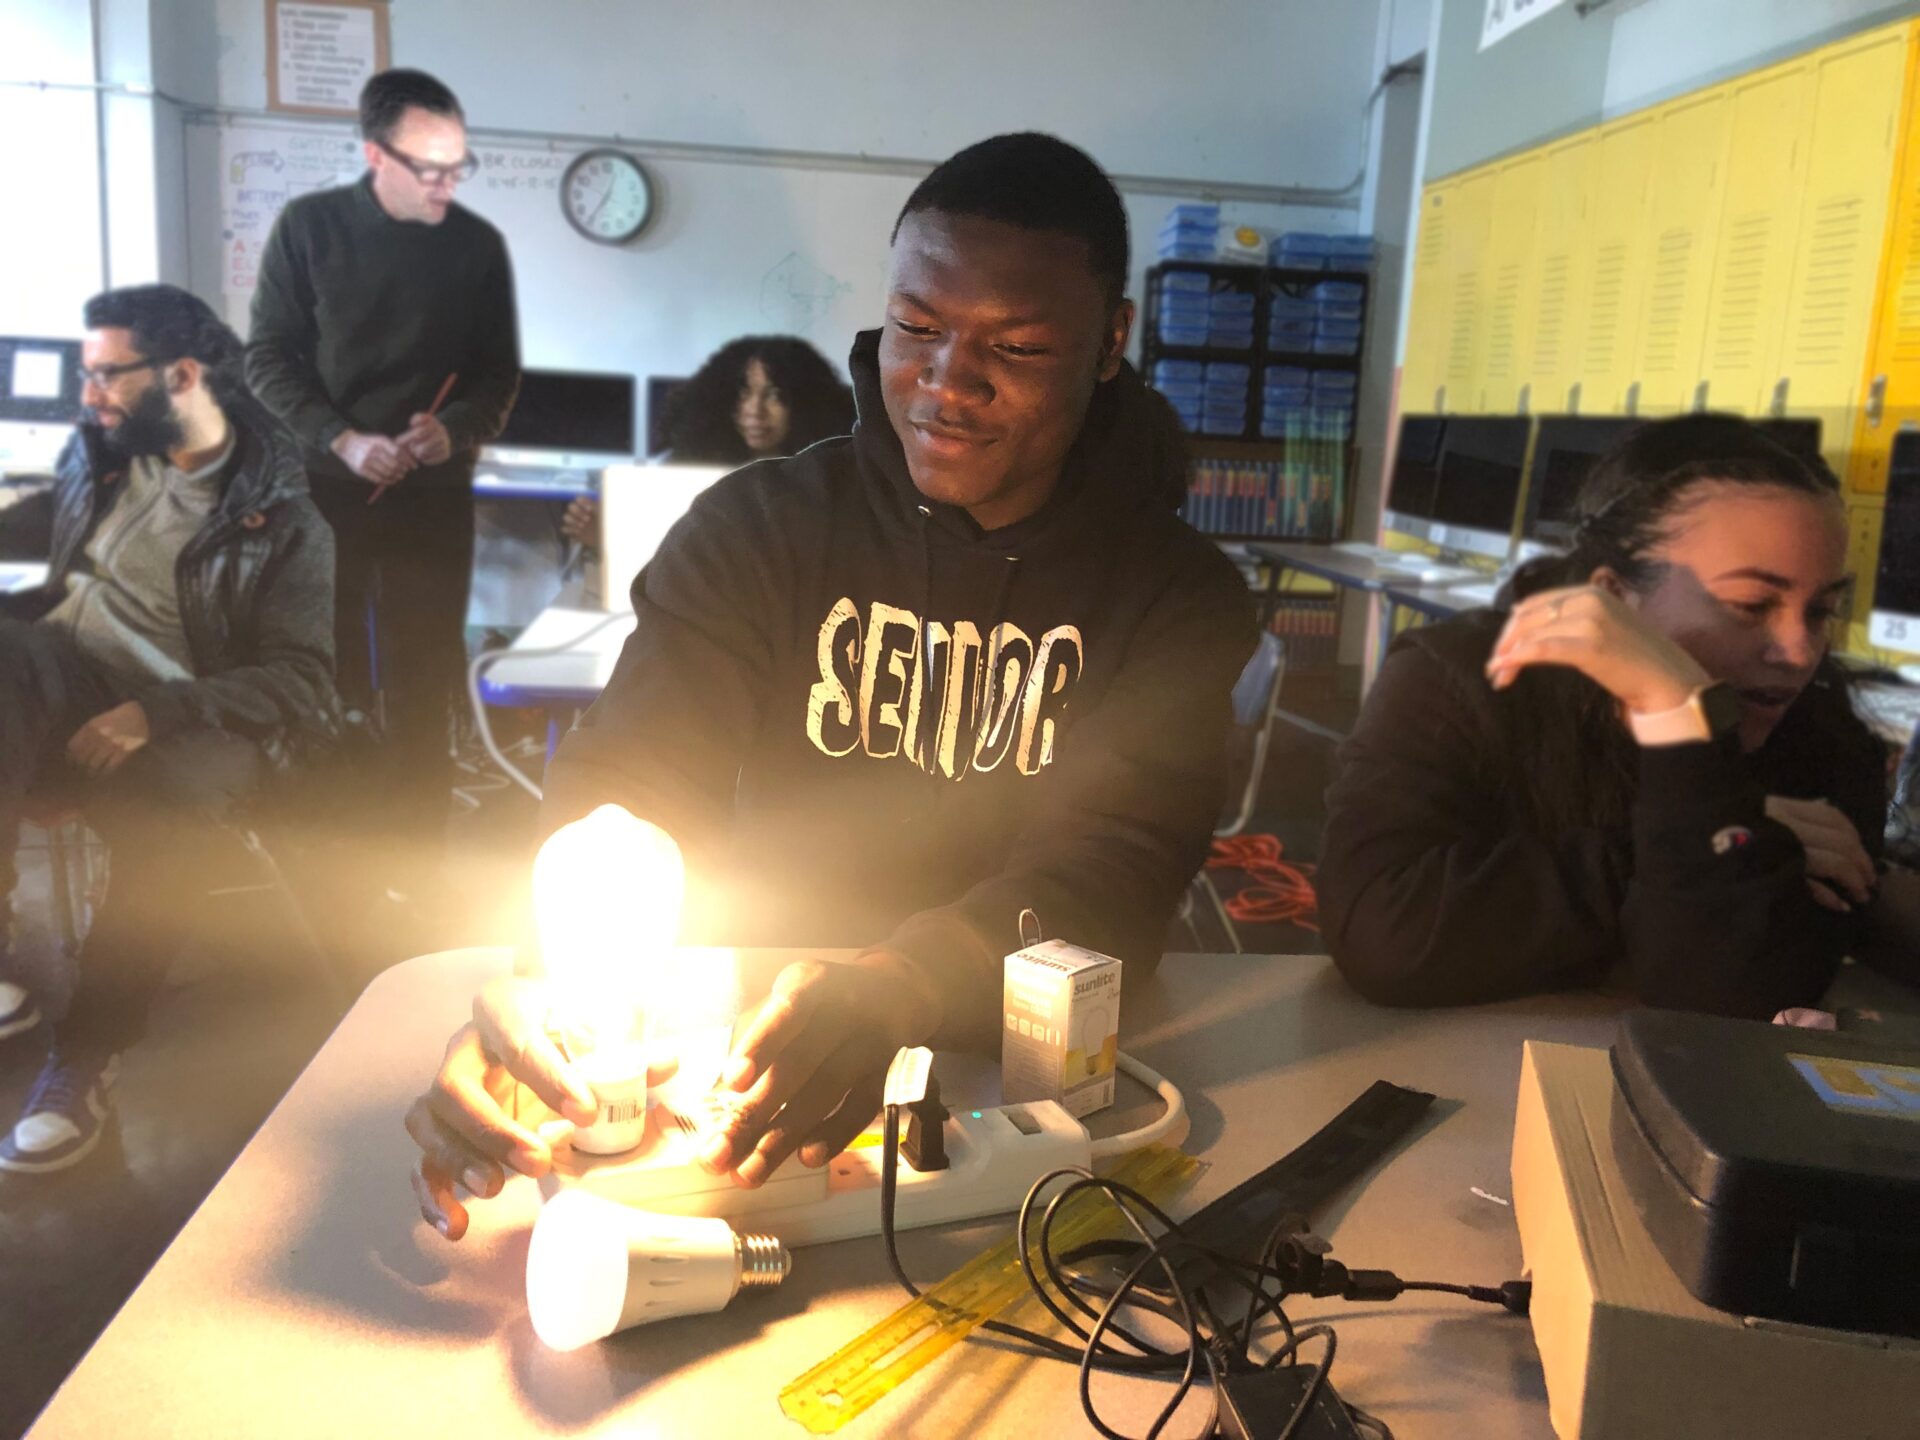 Student wearing "Senior" hoodie, smiling while experimenting with light project in a classroom with other students sitting at desks/tables and instructor standing in the background.